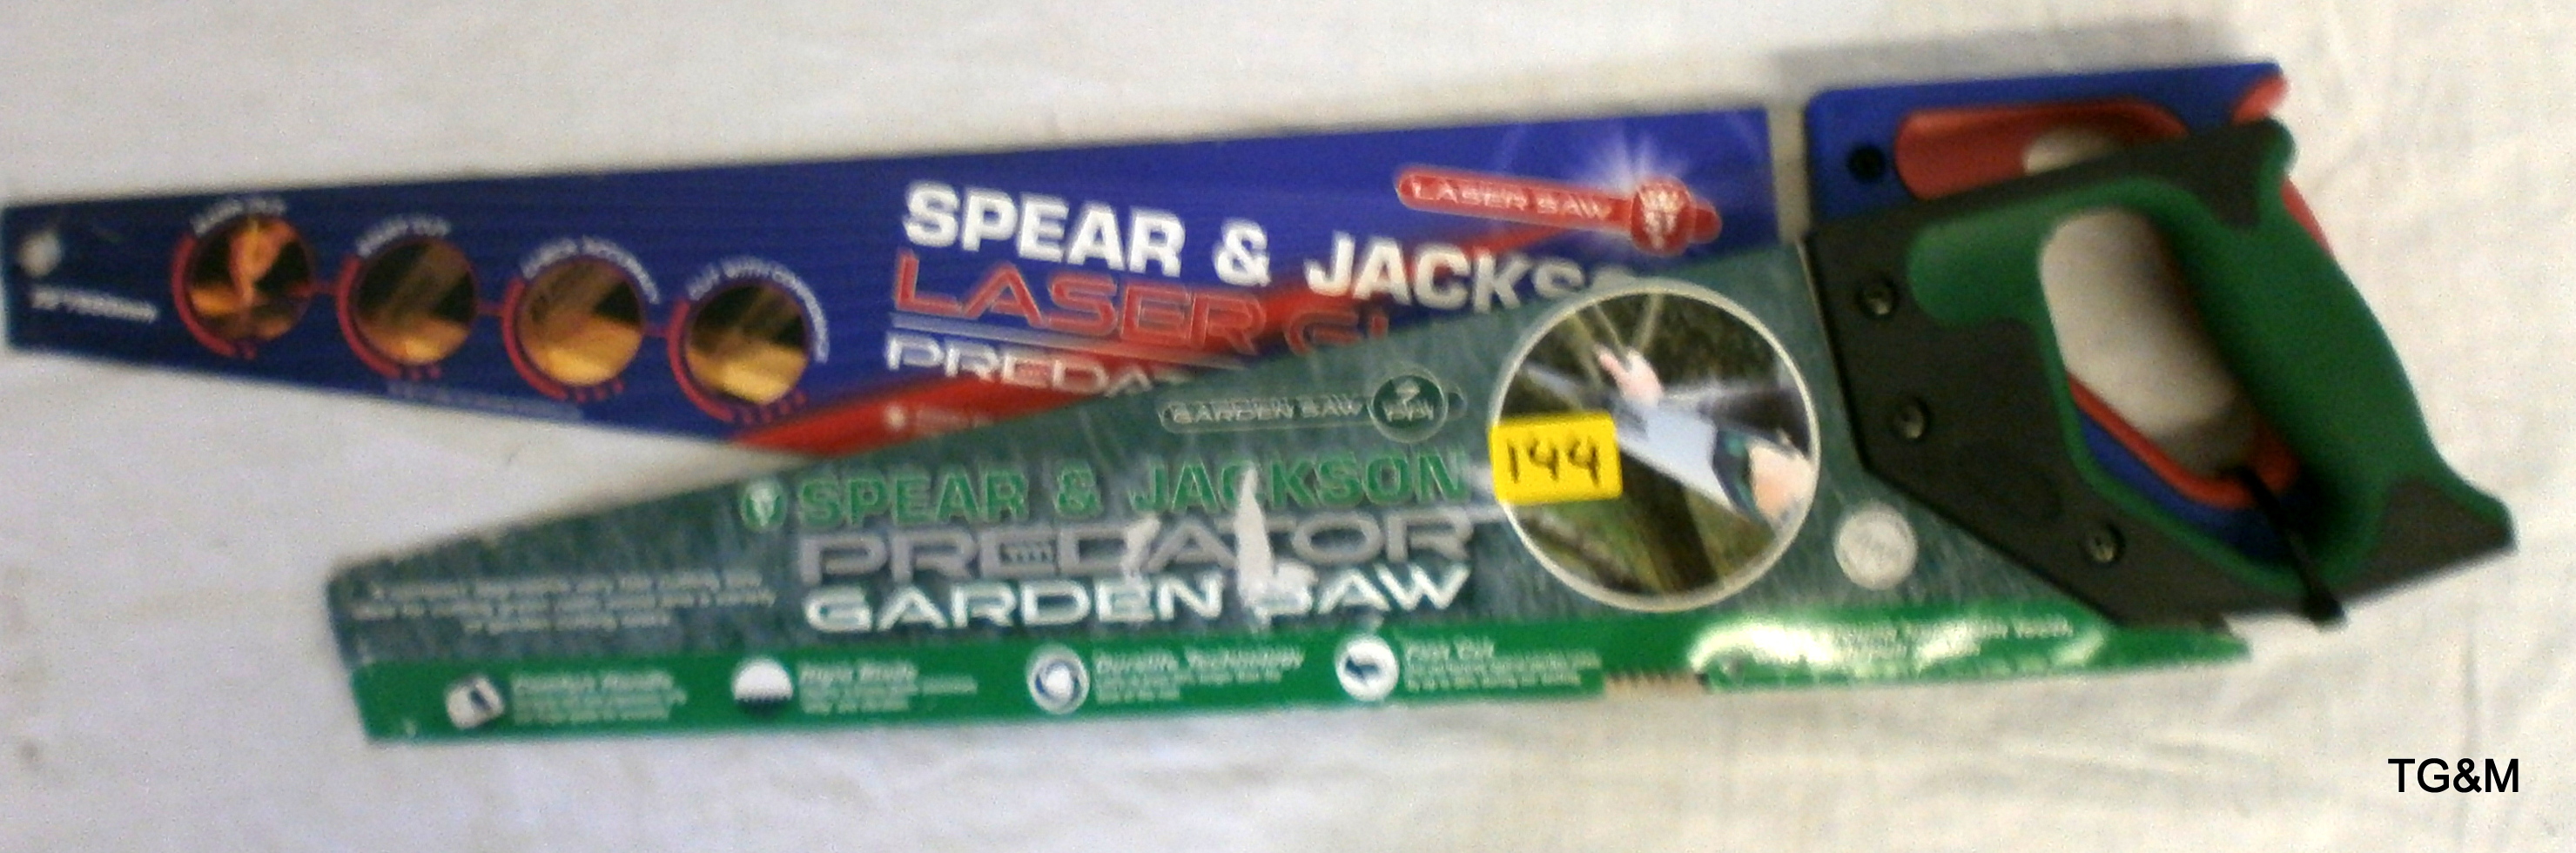 2 x Spear and Jackson laser saws